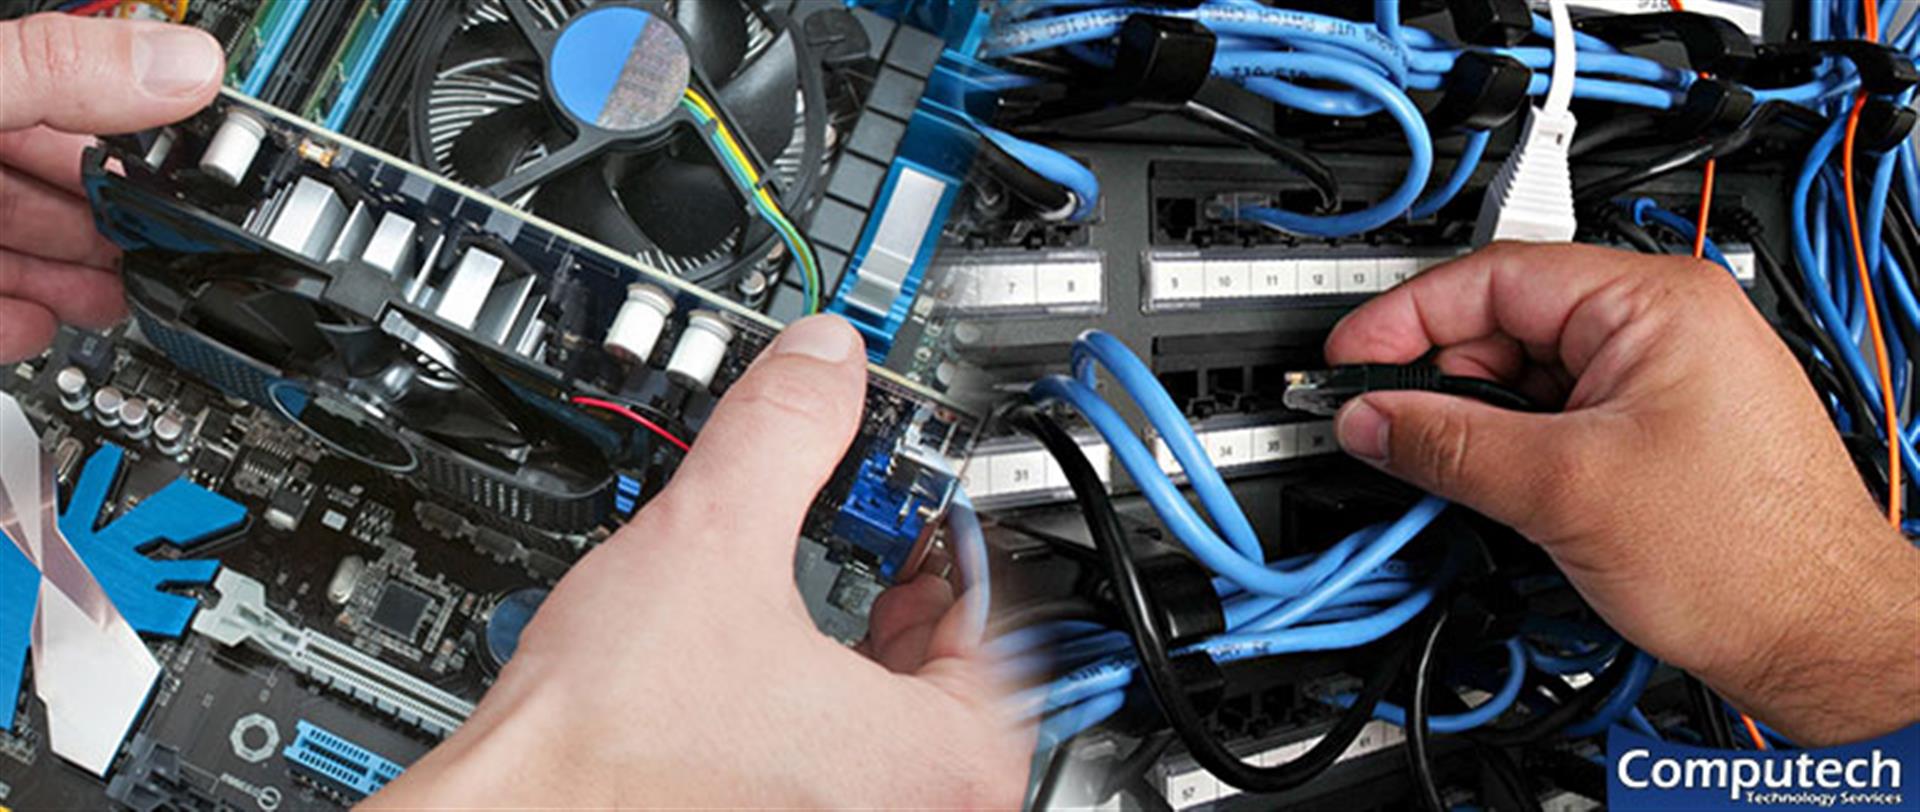 Dacula Georgia On-Site PC & Printer Repair, Networking, Voice & Data Cabling Services